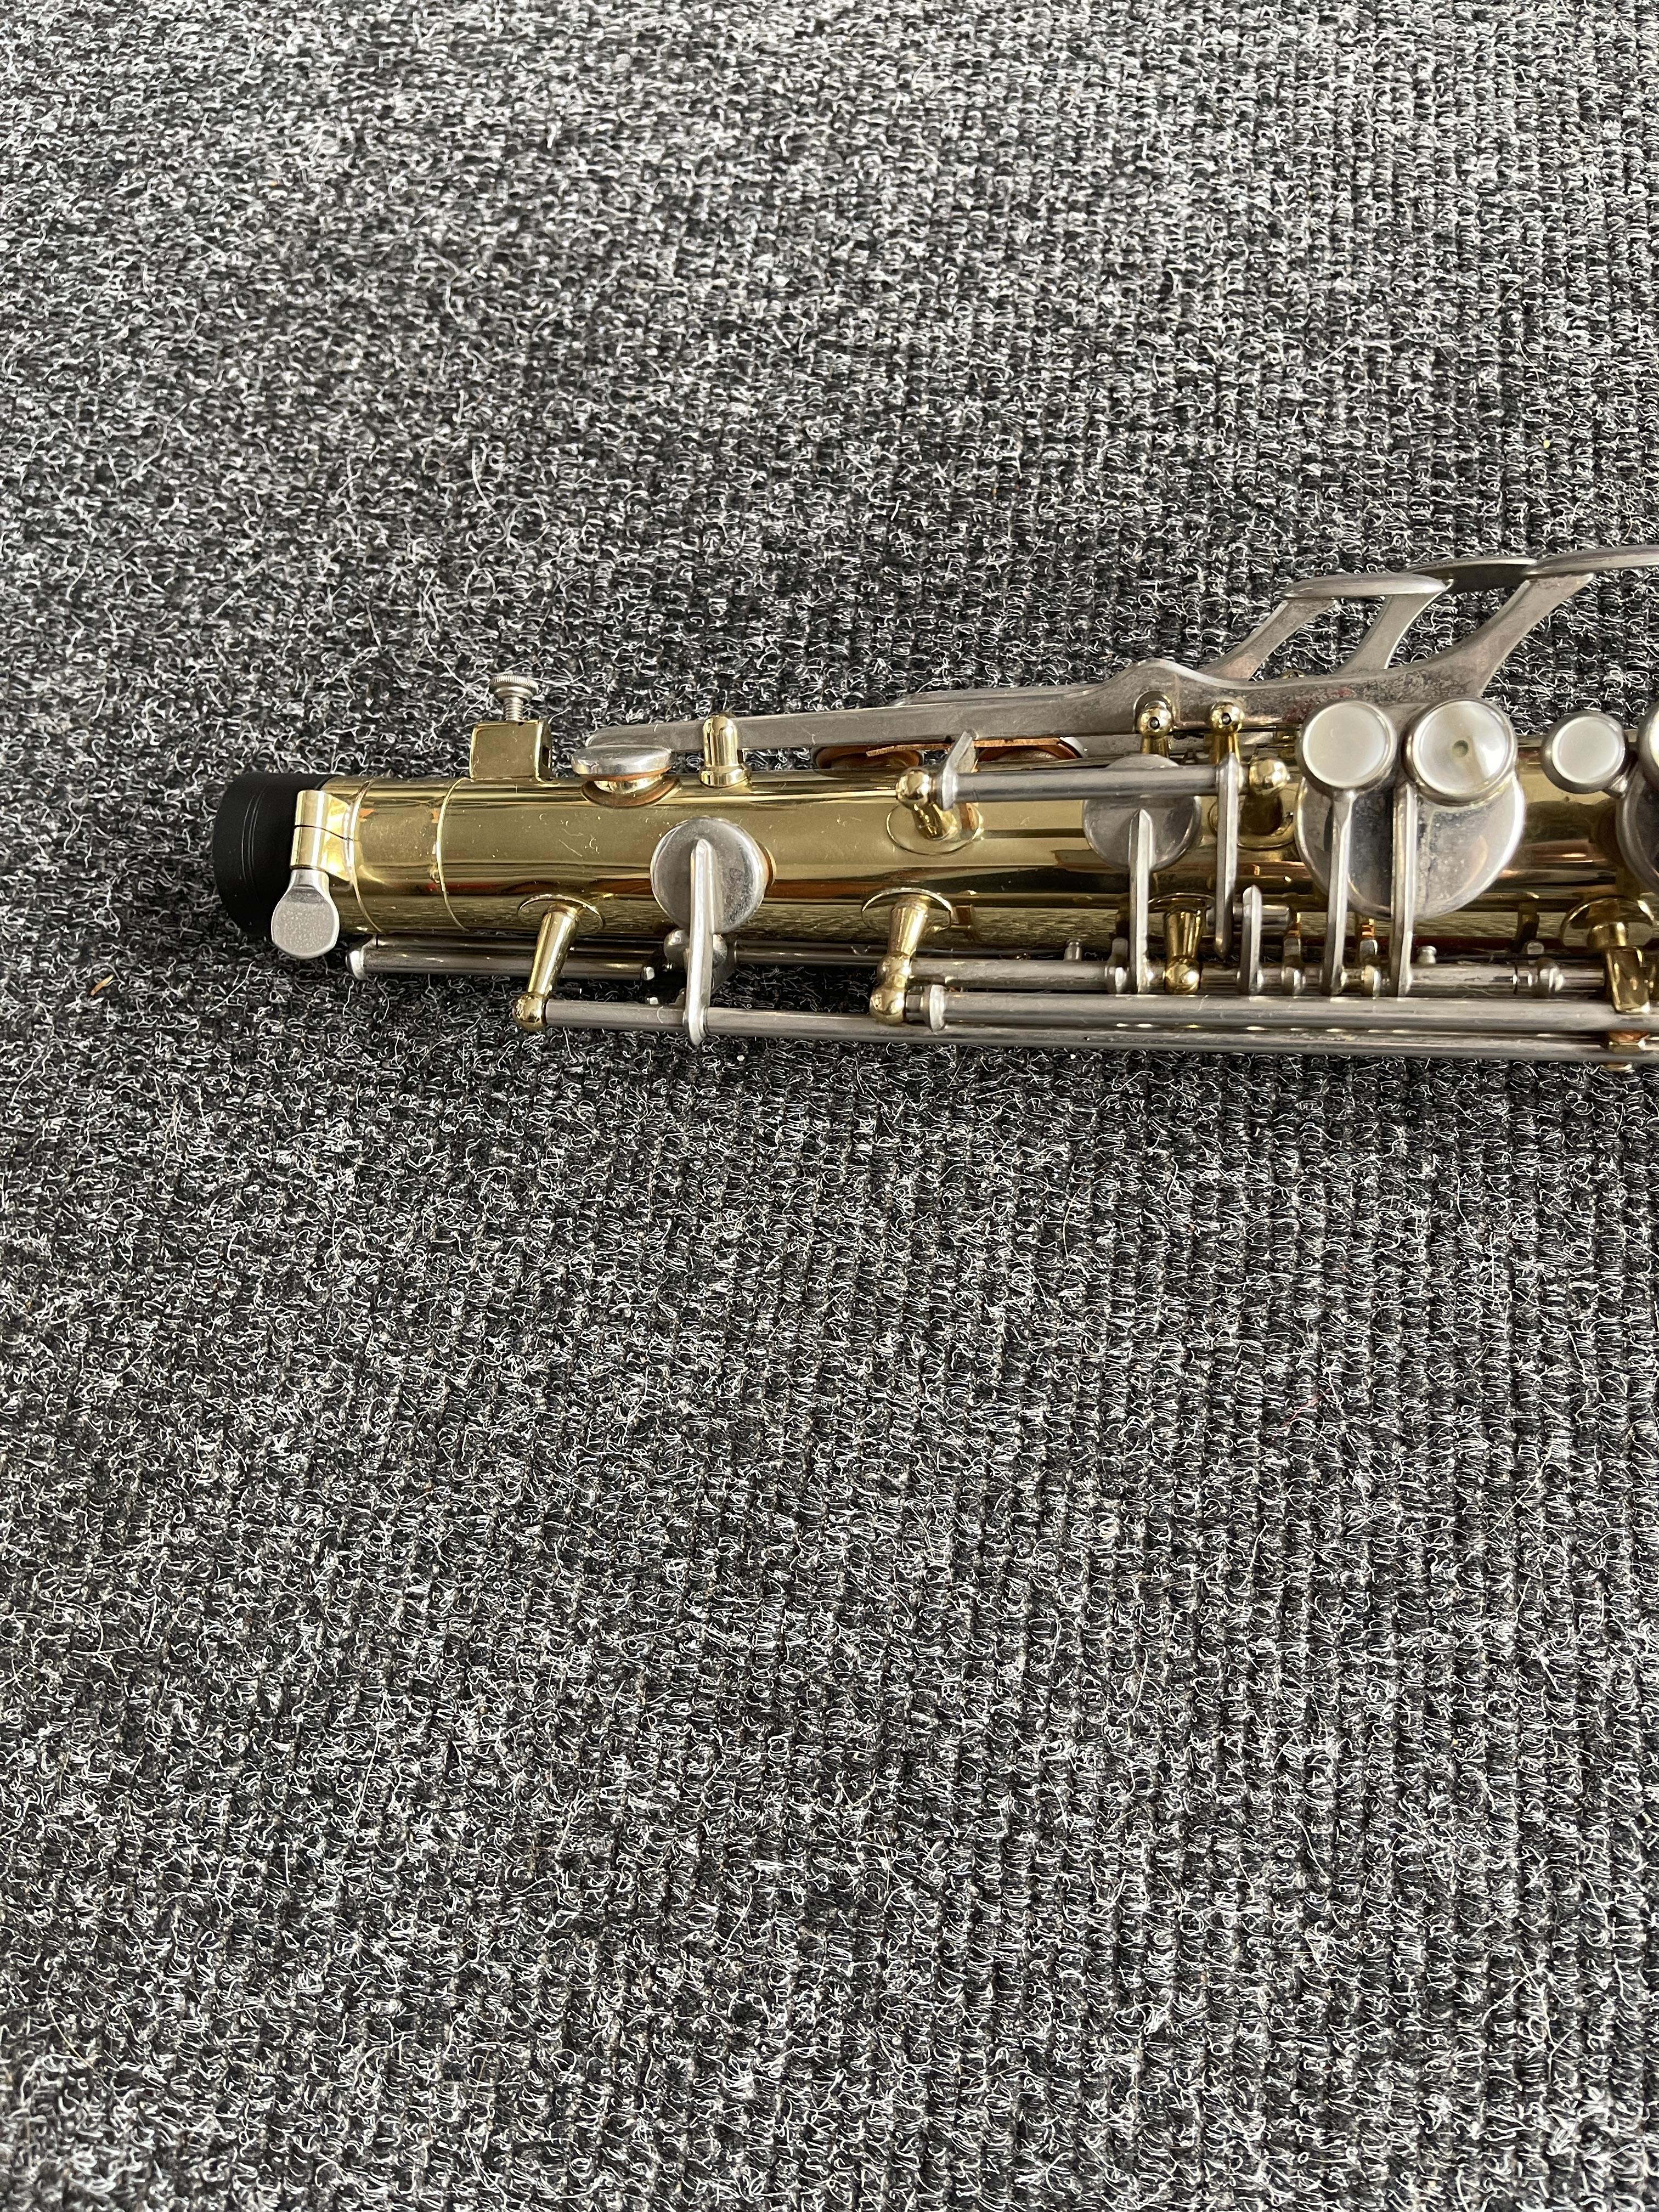 B&H 400 made for Boosey & Hawkes Cased Saxophone. - Image 18 of 31